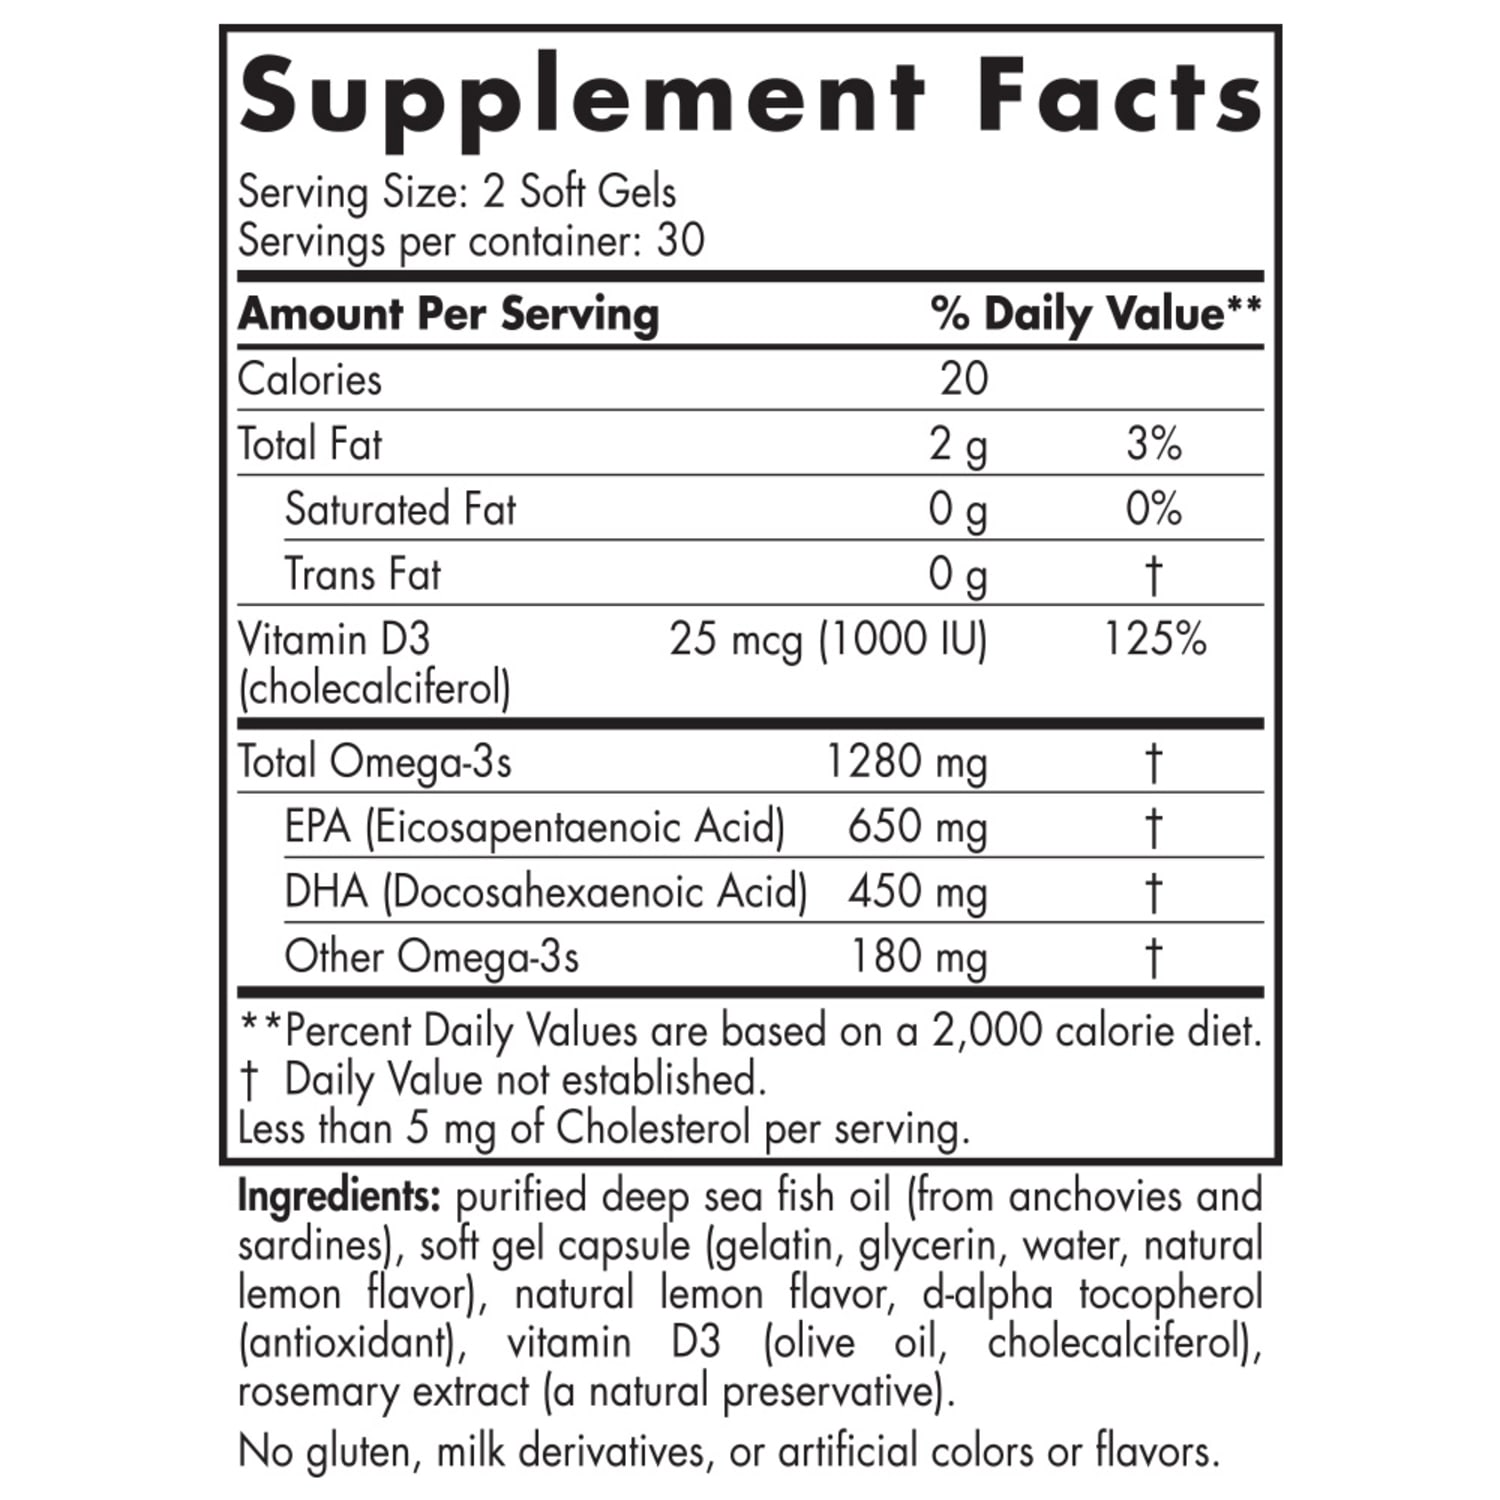 Nordic Naturals Ultimate Omega with Vitamin D Supplement Facts